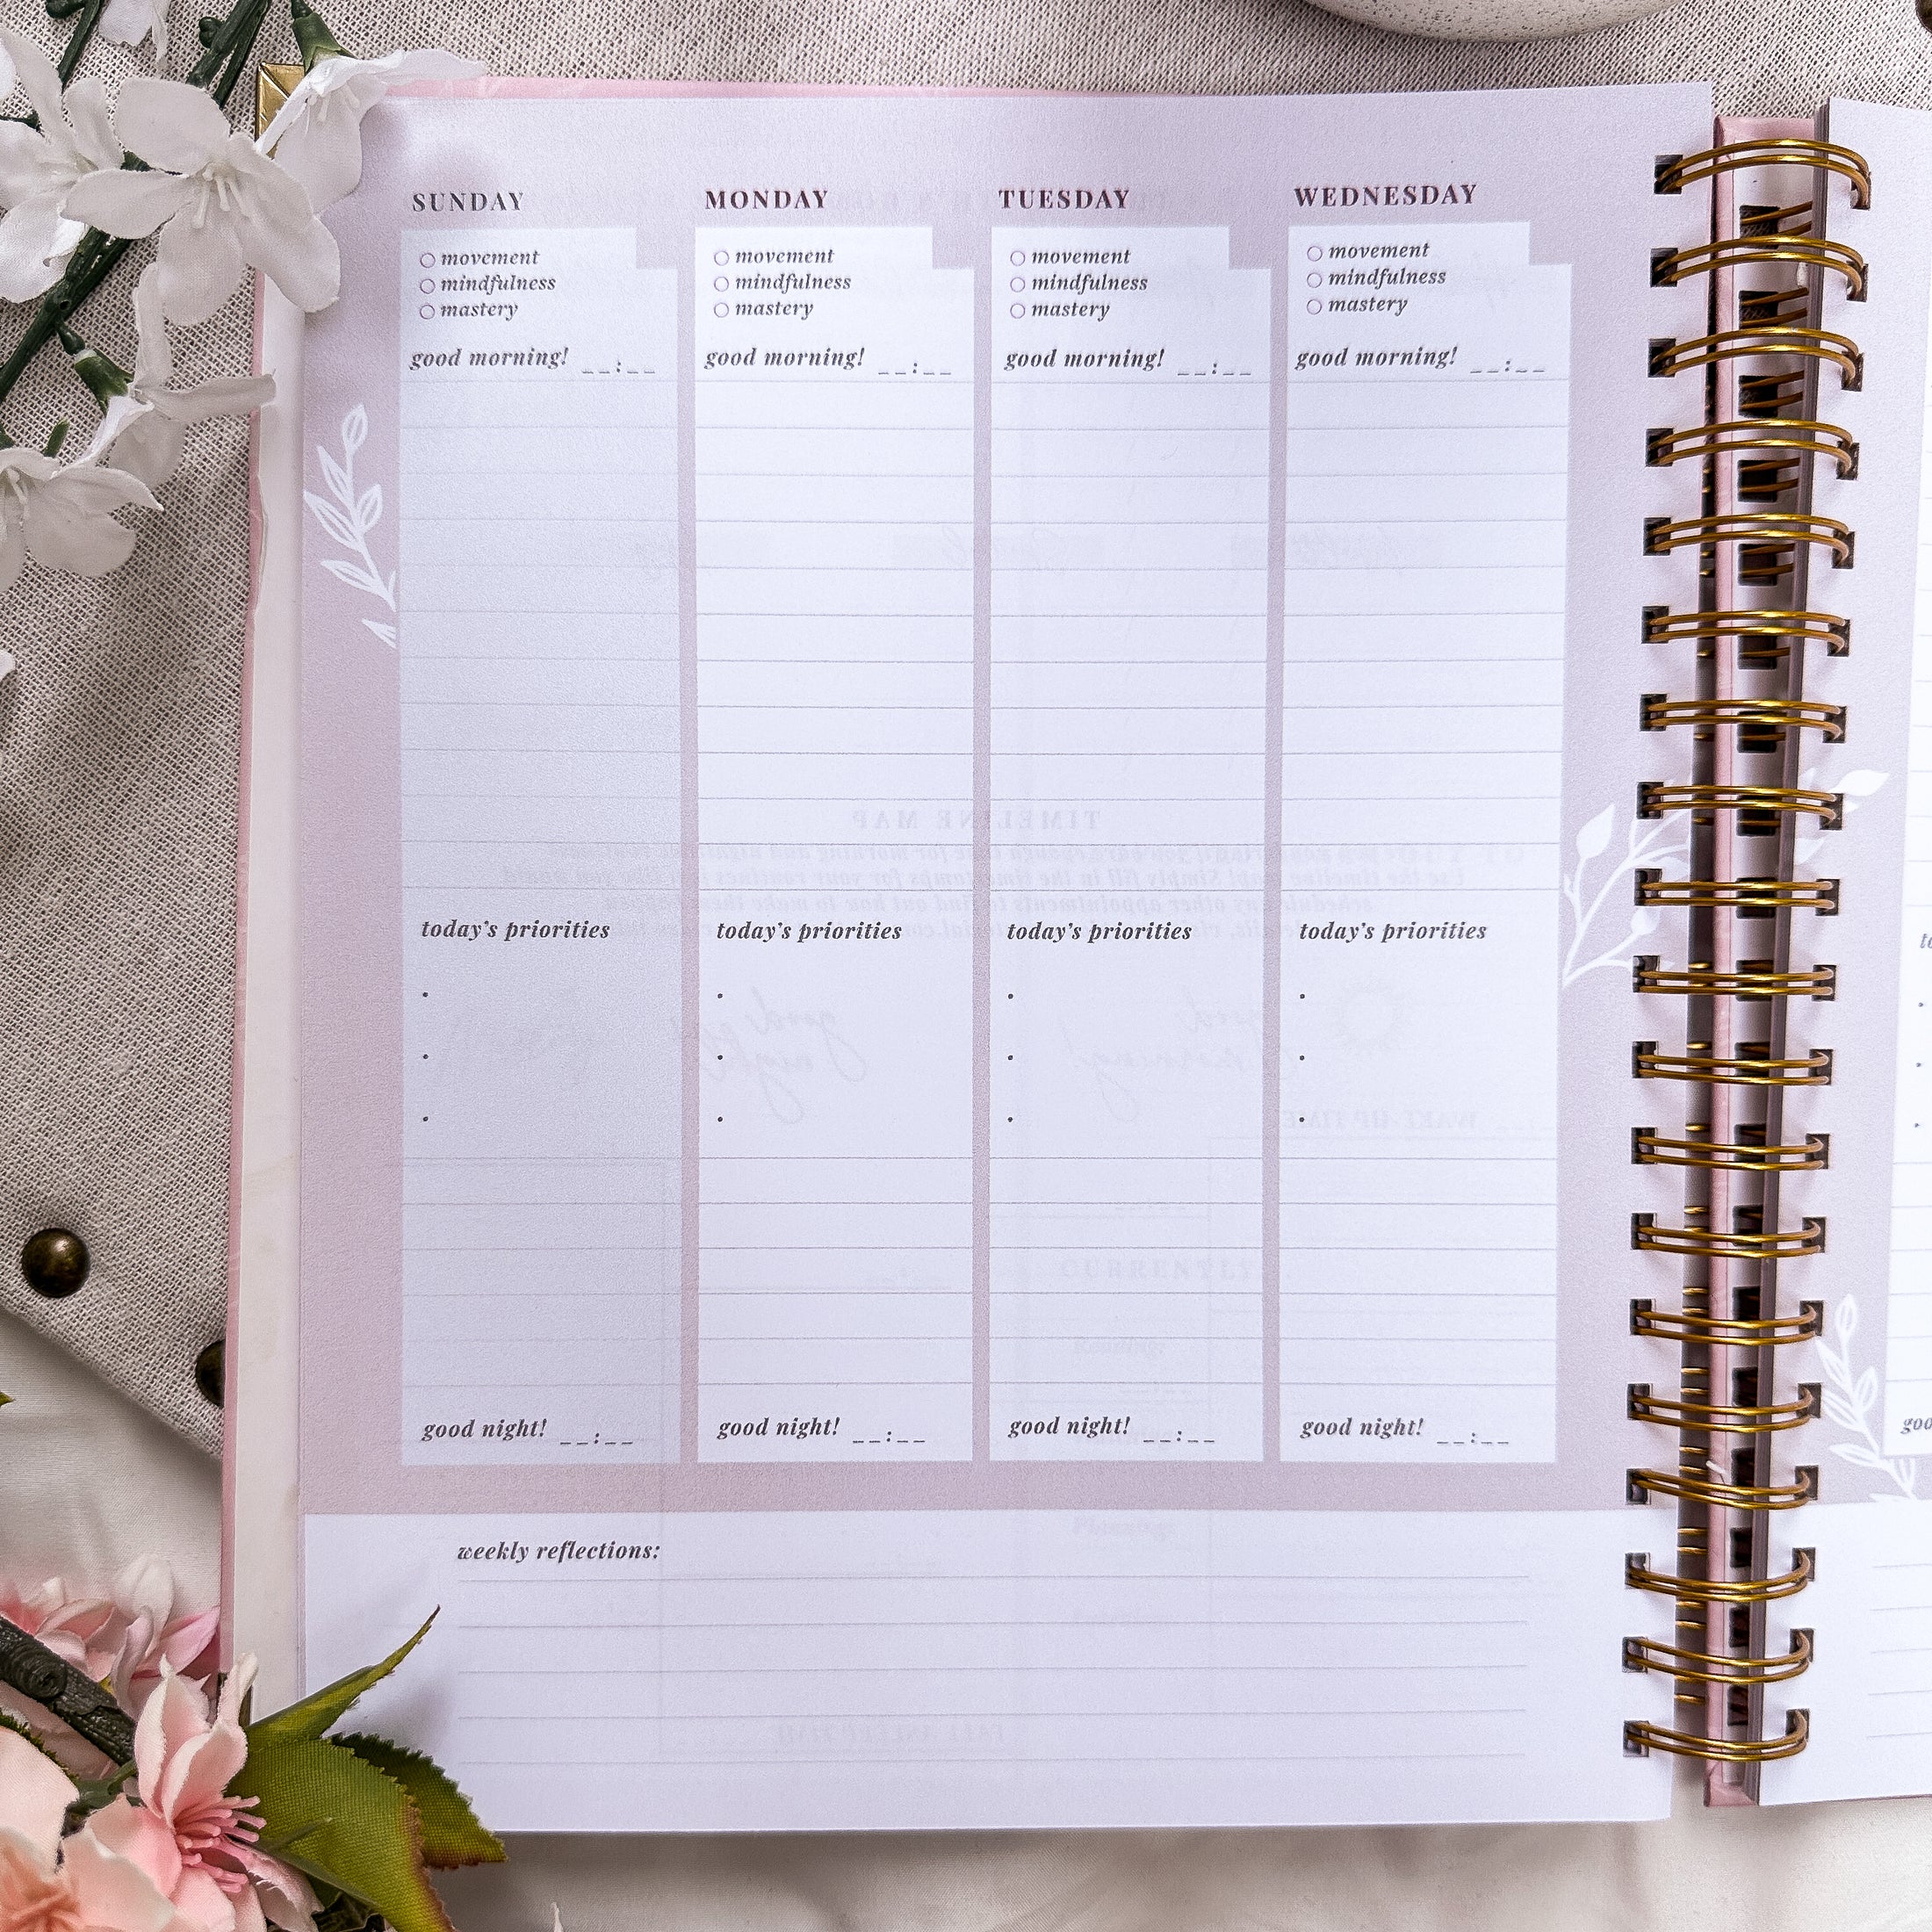 Good Morning, Good Life 12-Month Undated Planner | Bambina Rosa Pink